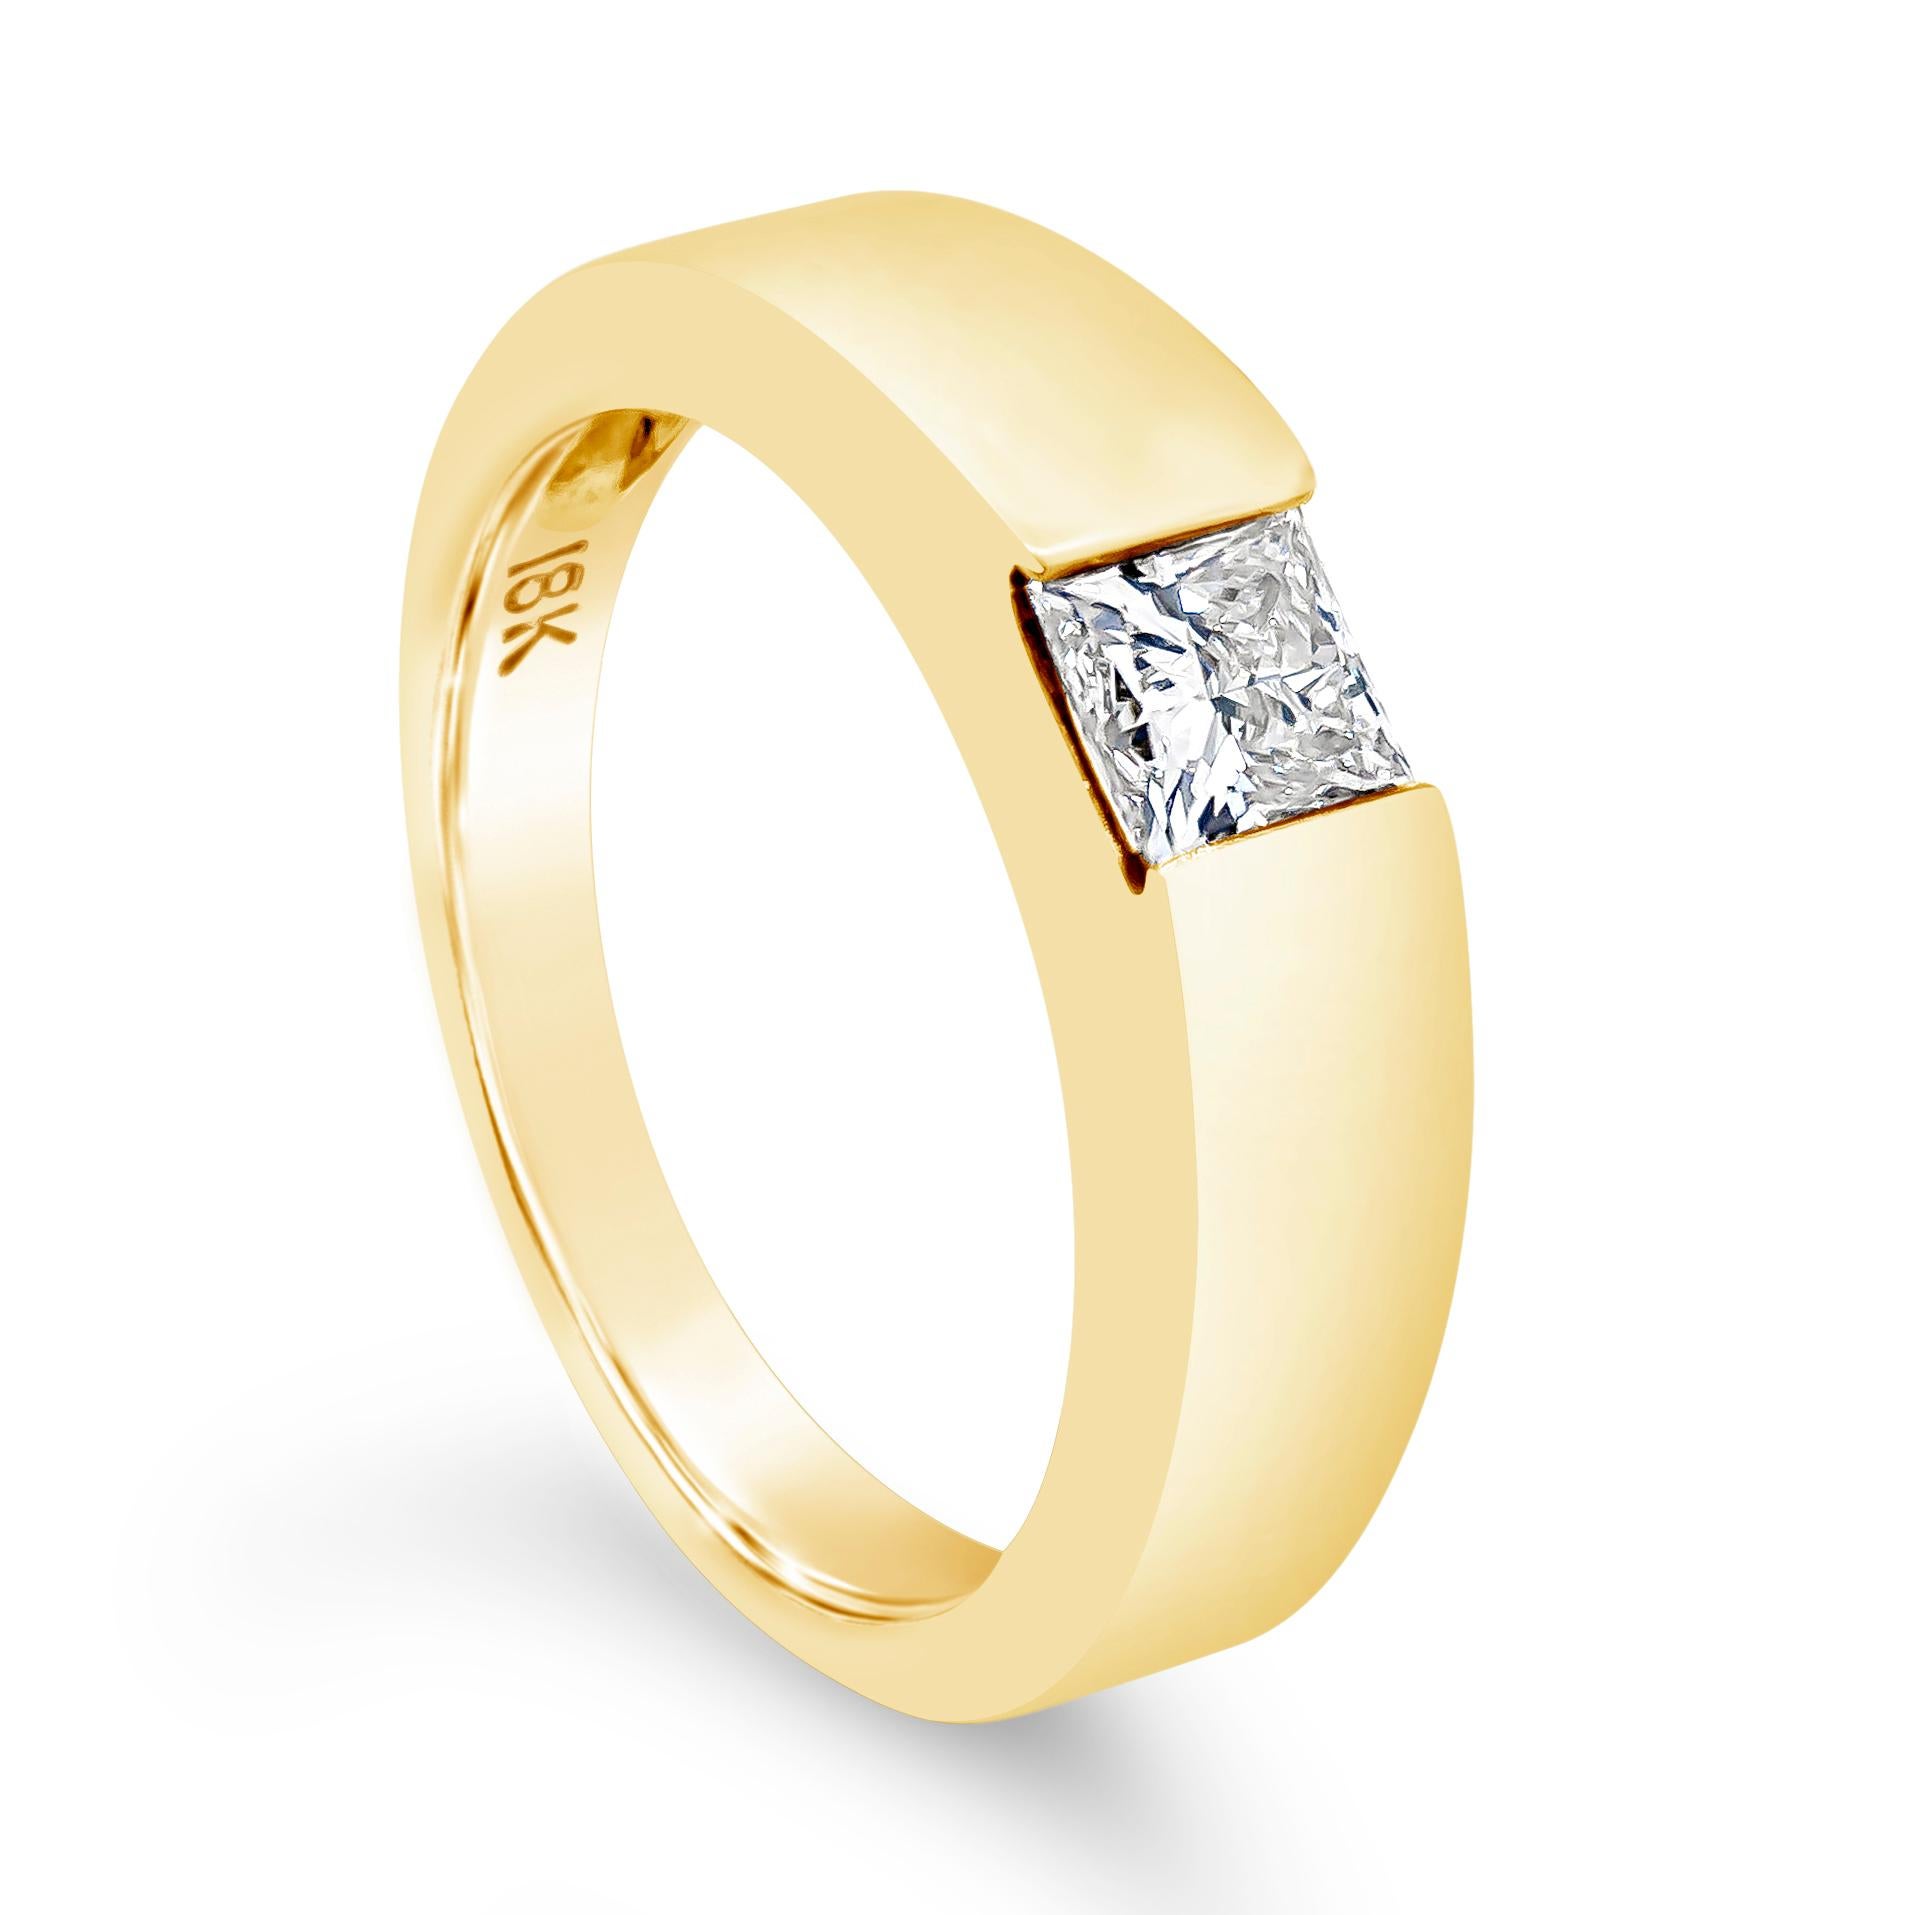 A simple and modern ring style showcasing a solitaire princess cut diamond weighing 0.55 carats, Certified by EGL as J Color and VVS2 in Clarity. The band has an angular tapered design, and set in a semi-bezel setting. Made in 18K Yellow